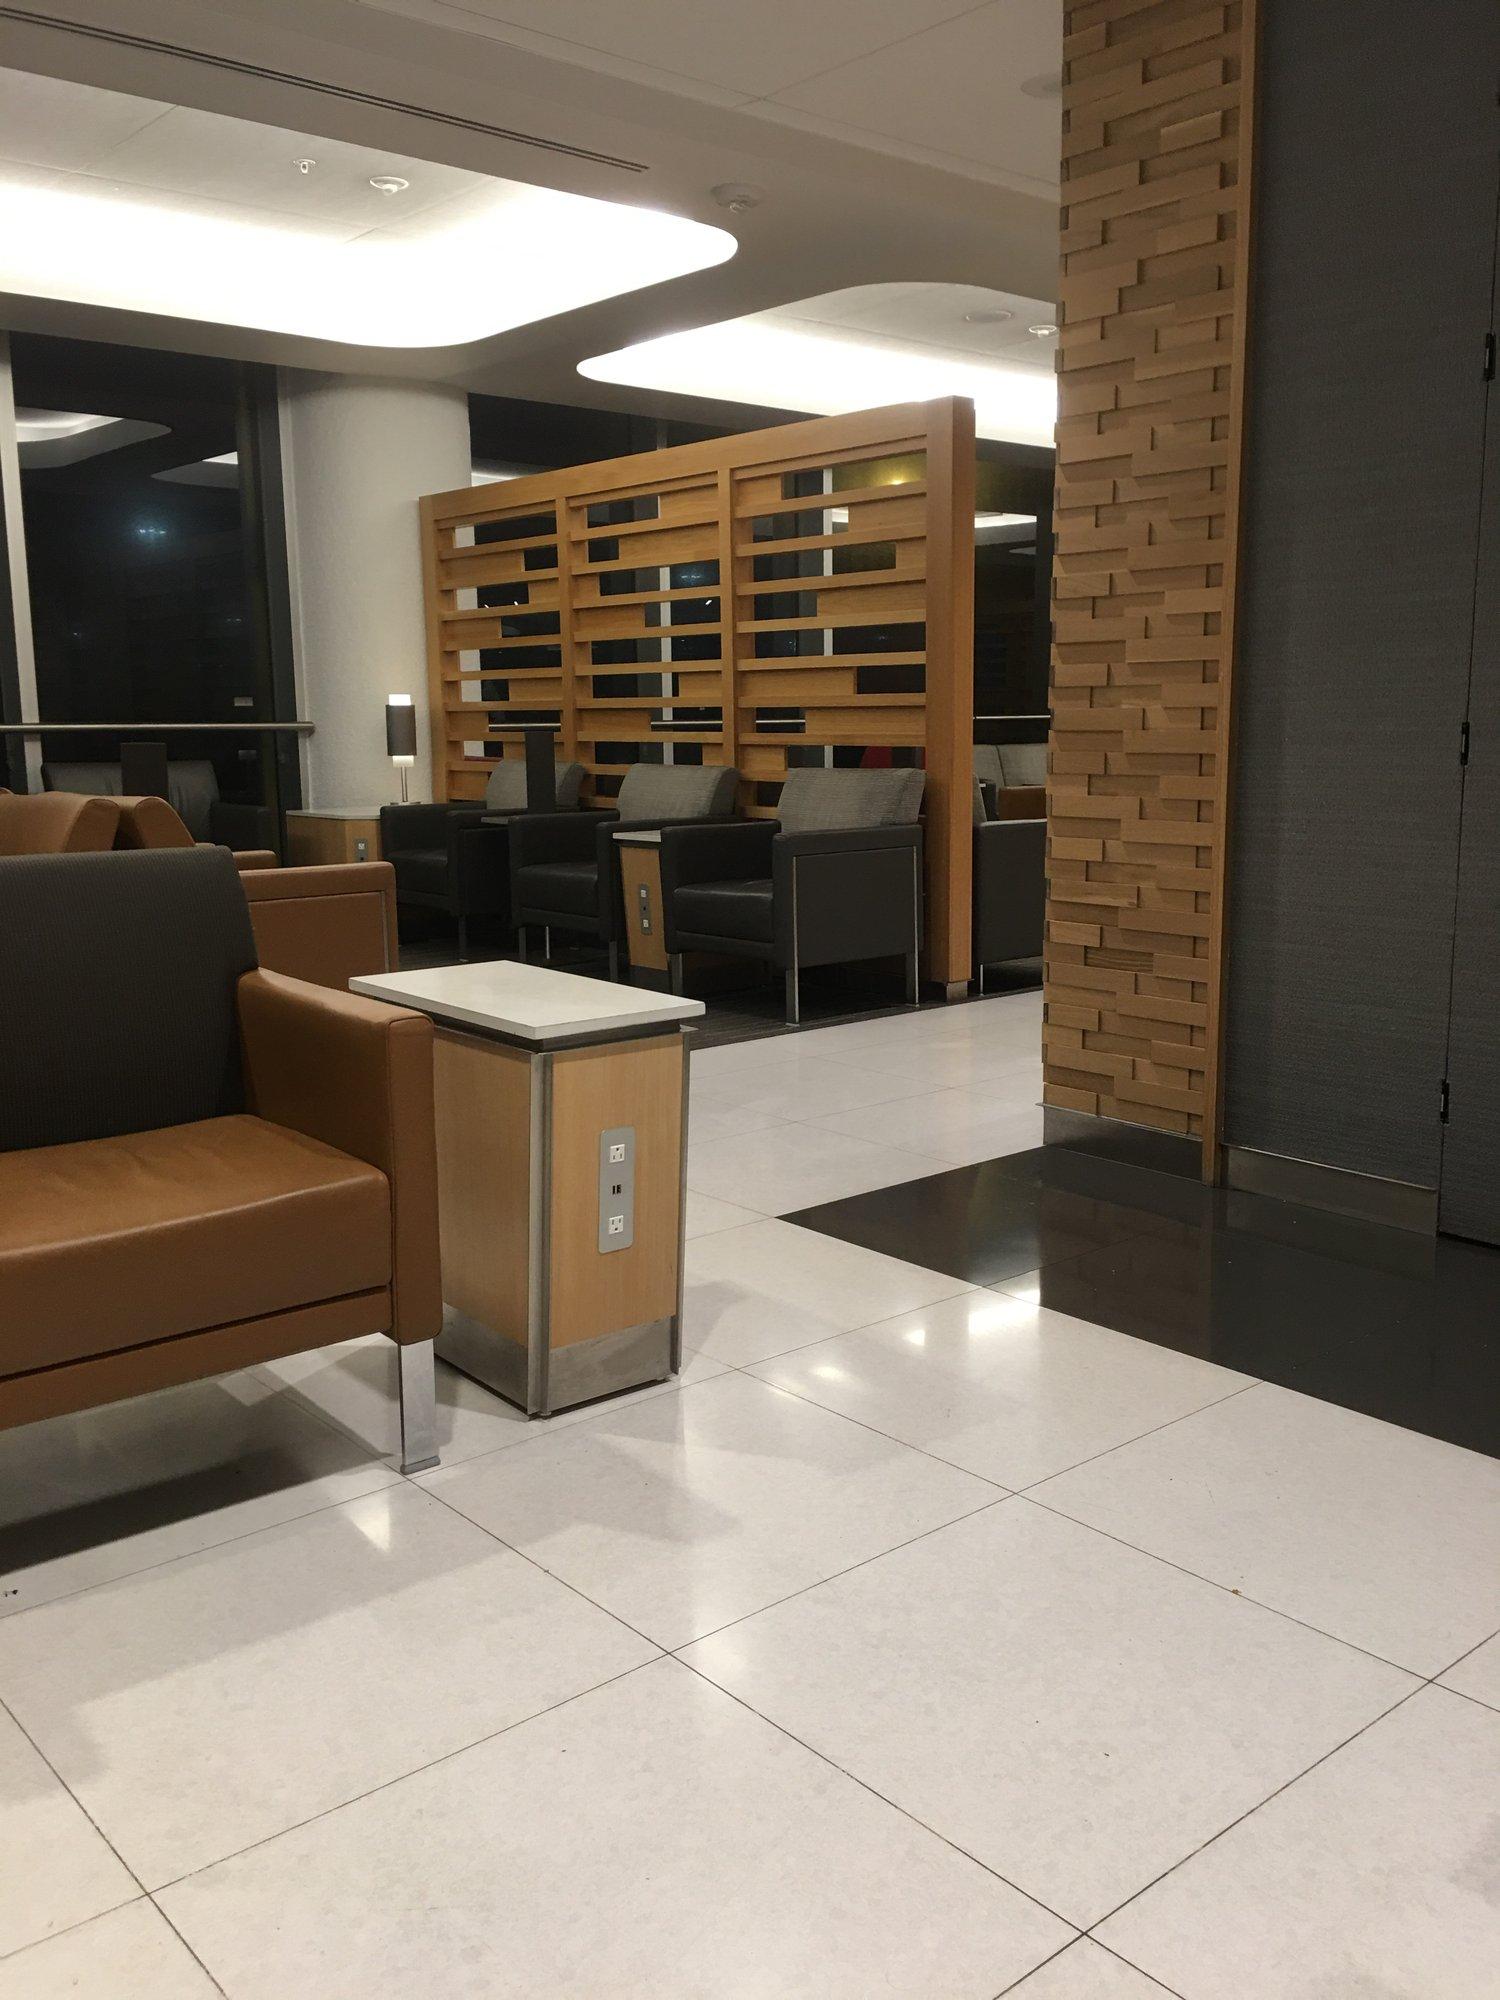 American Airlines Admirals Club (Gate D15) image 10 of 25